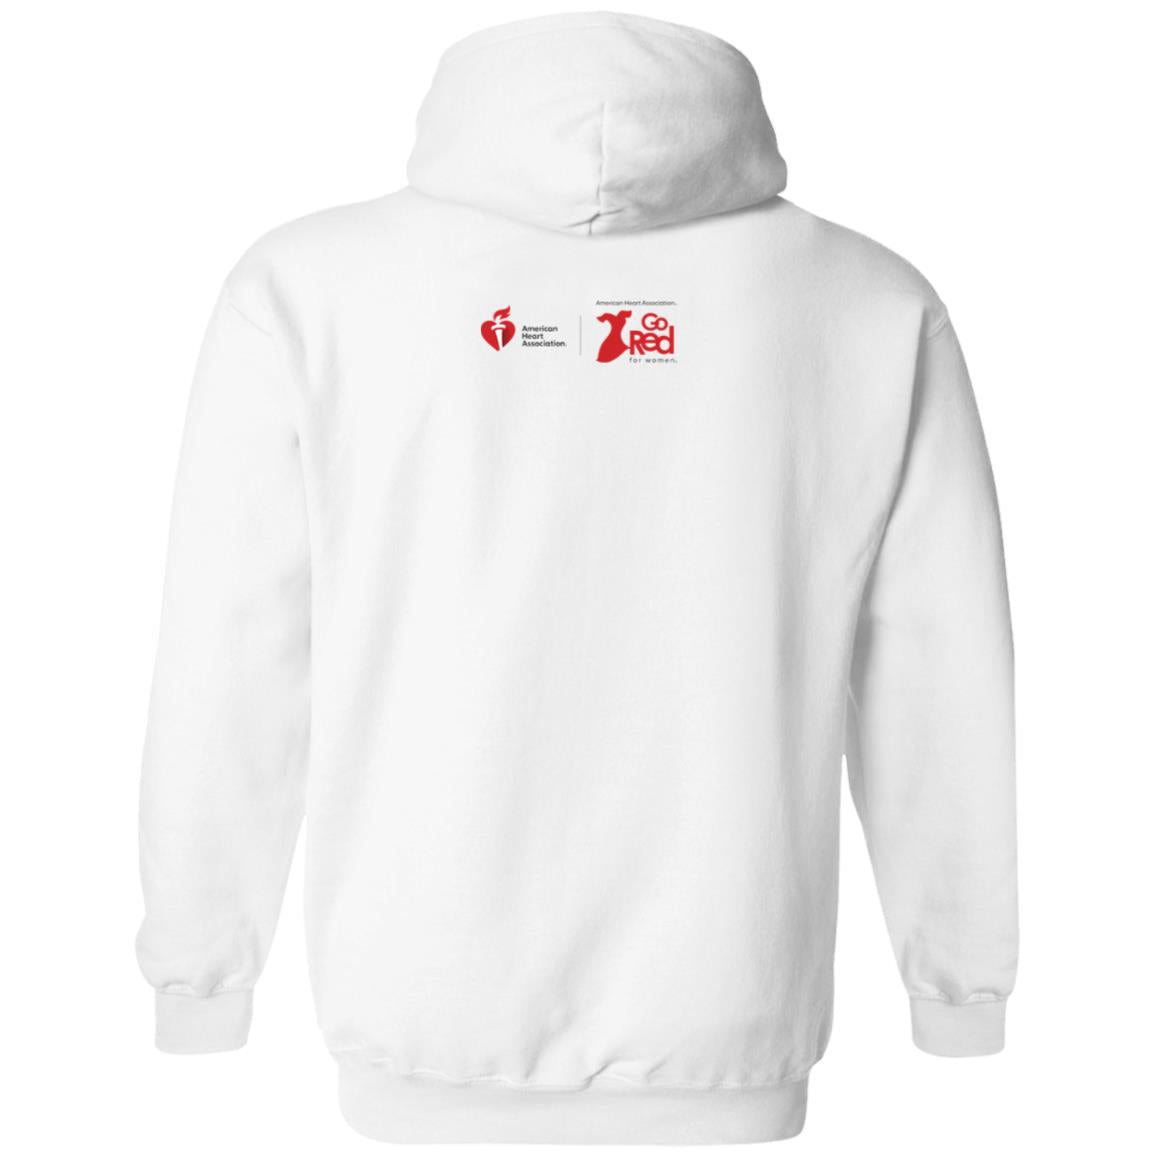 Back of hoodie includes AHA and Go Red brand symbols placed on the top of back.